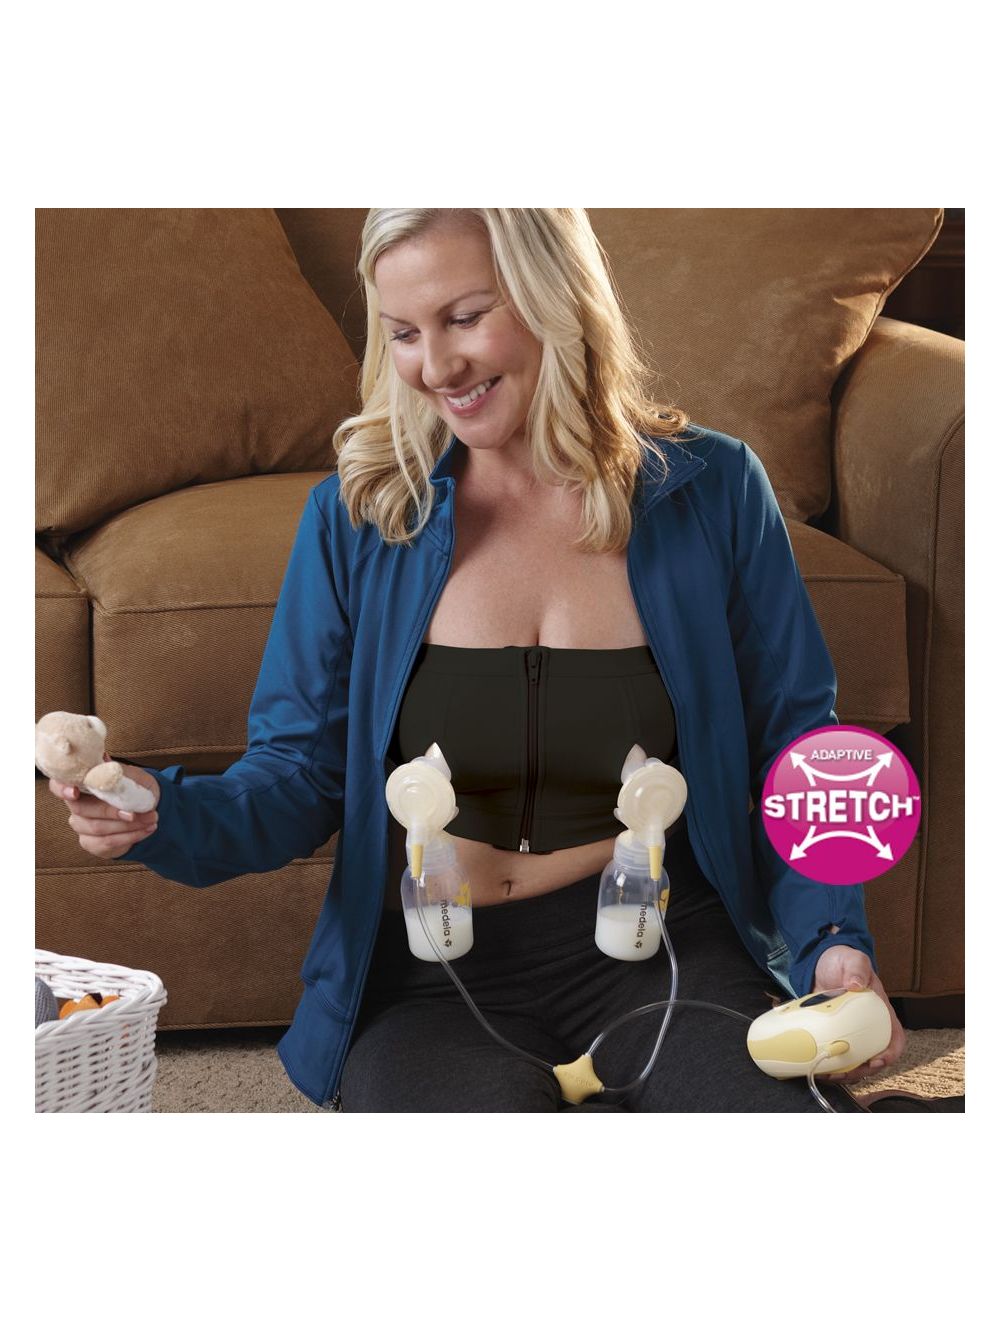  Medela Easy Expression Hands-Free Bustier, Black, Small :  Electric Double Breast Feeding Pumps : Baby